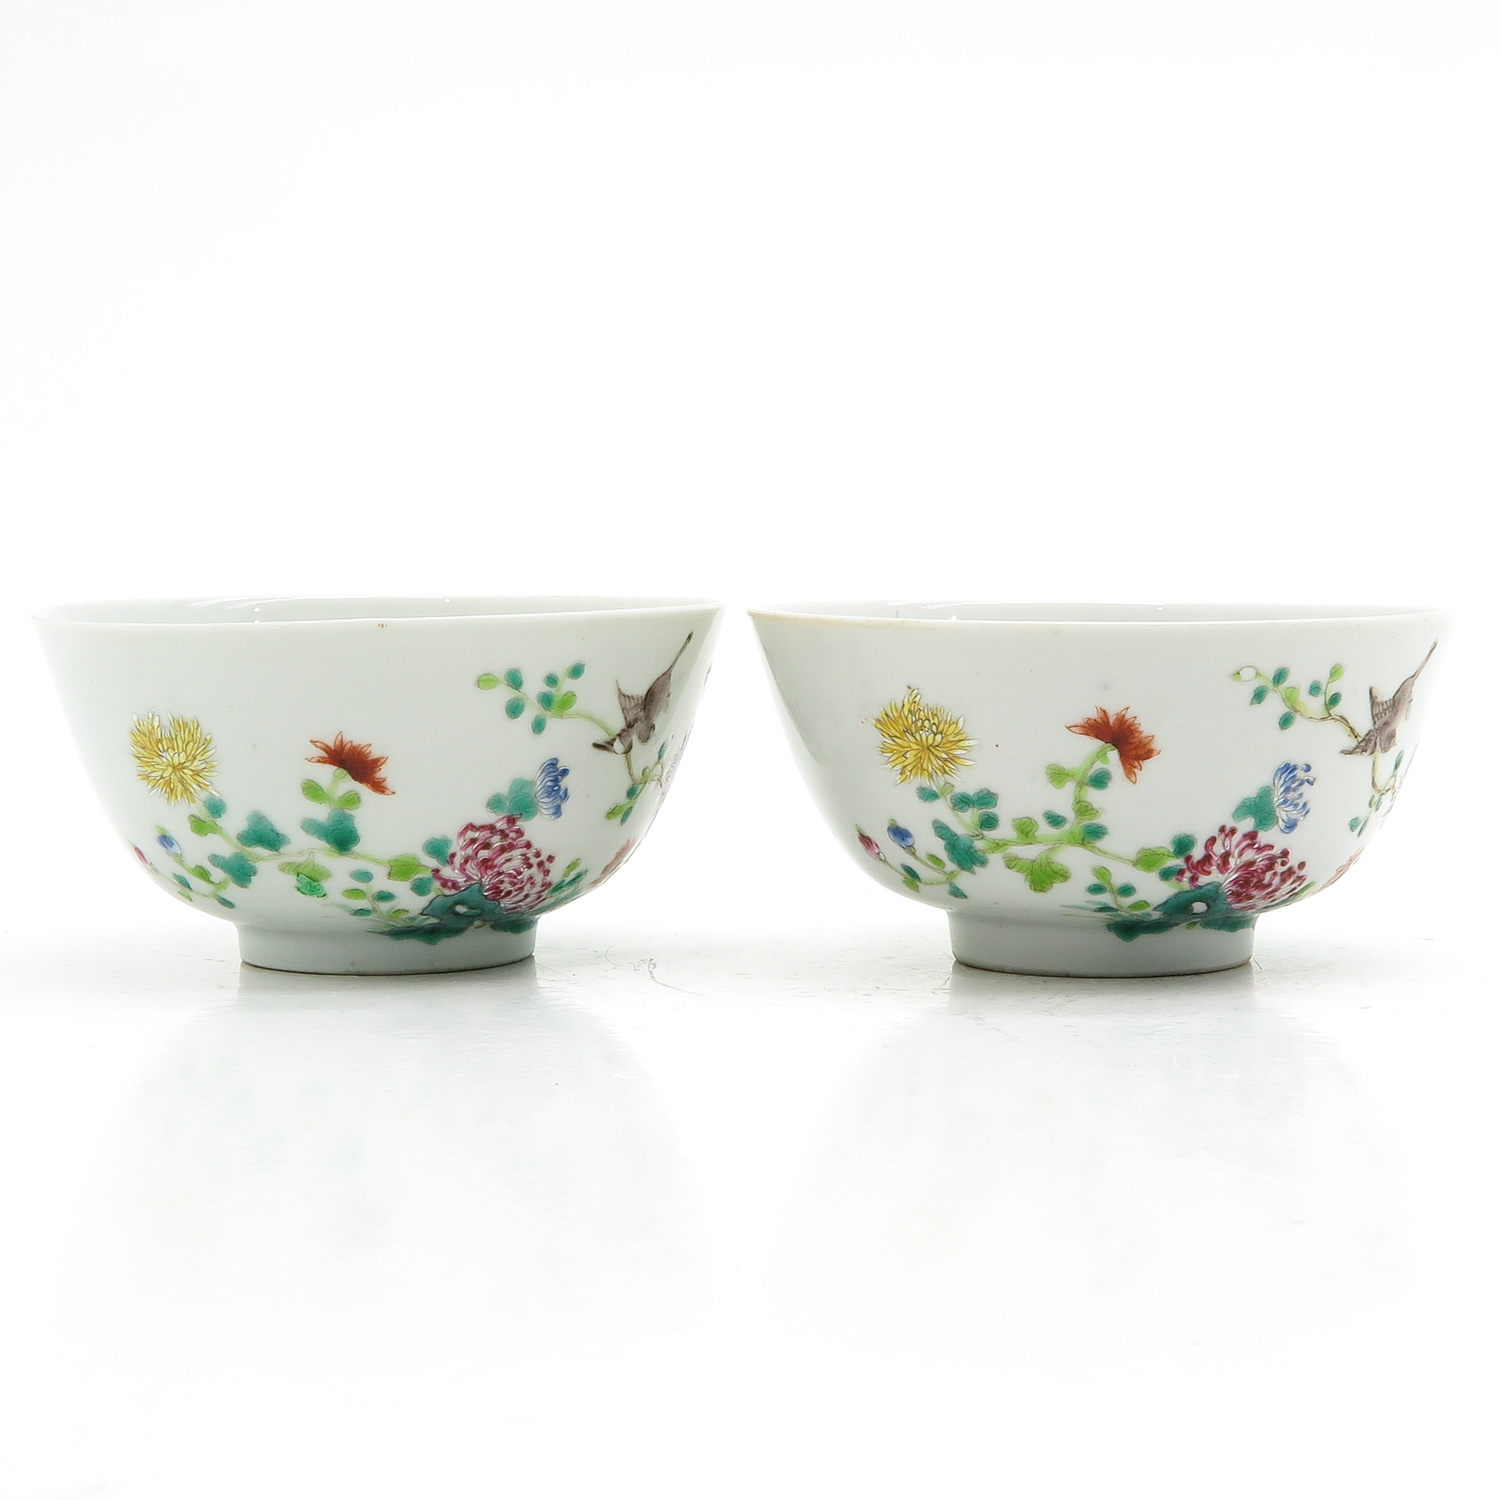 A Pair of Famille Rose Bowls - Image 4 of 10